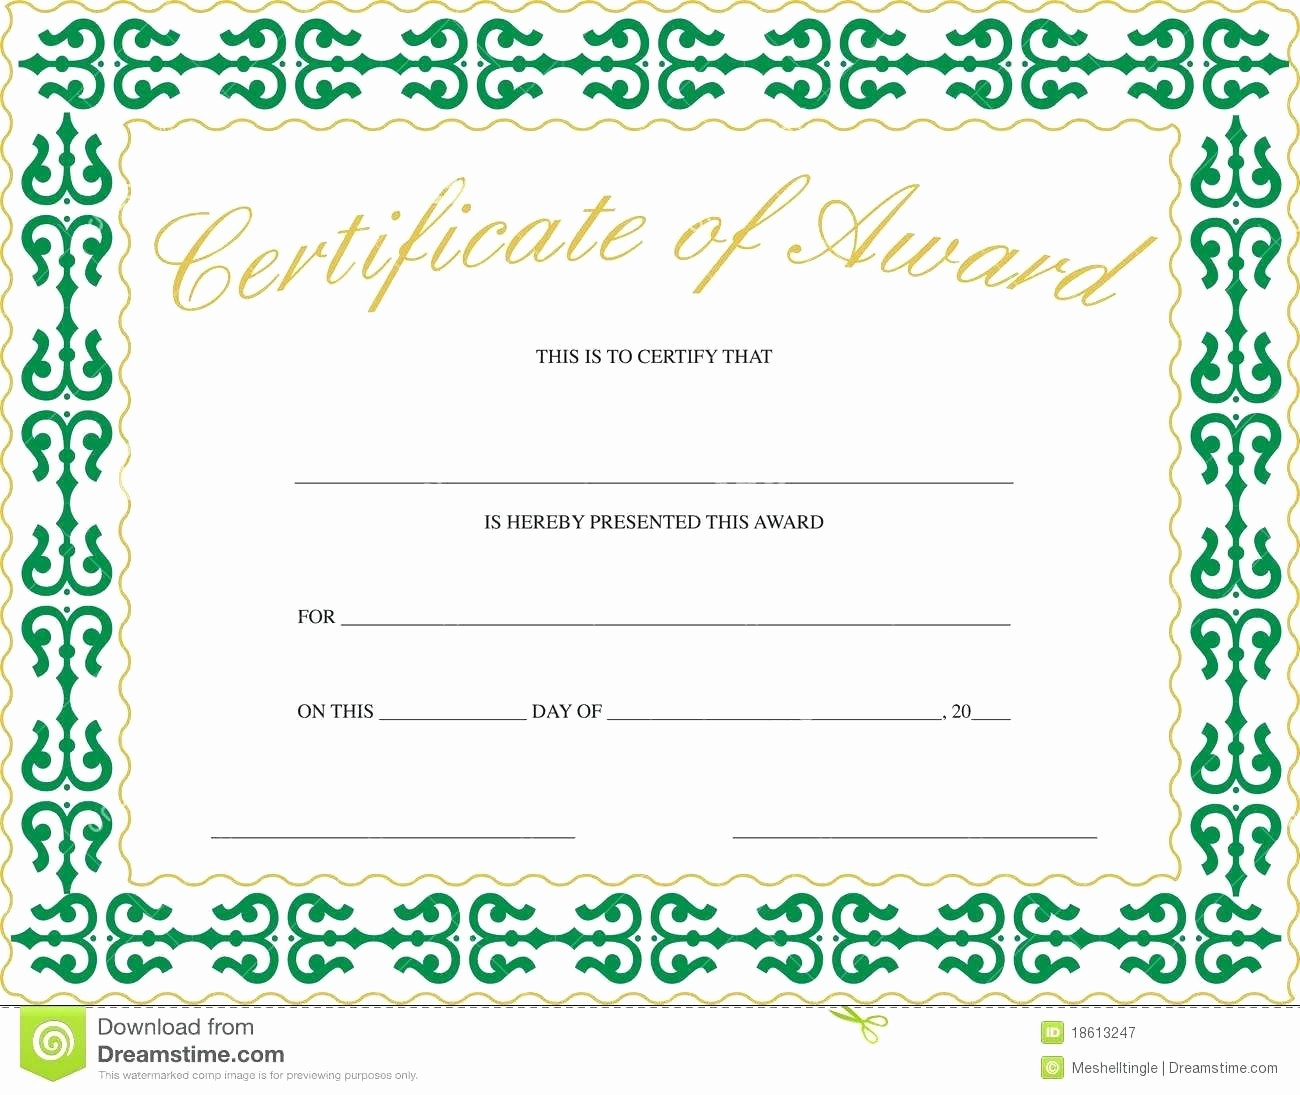 50 Most Improved Student Award Wording | Ufreeonline Template pertaining to New Most Improved Student Certificate